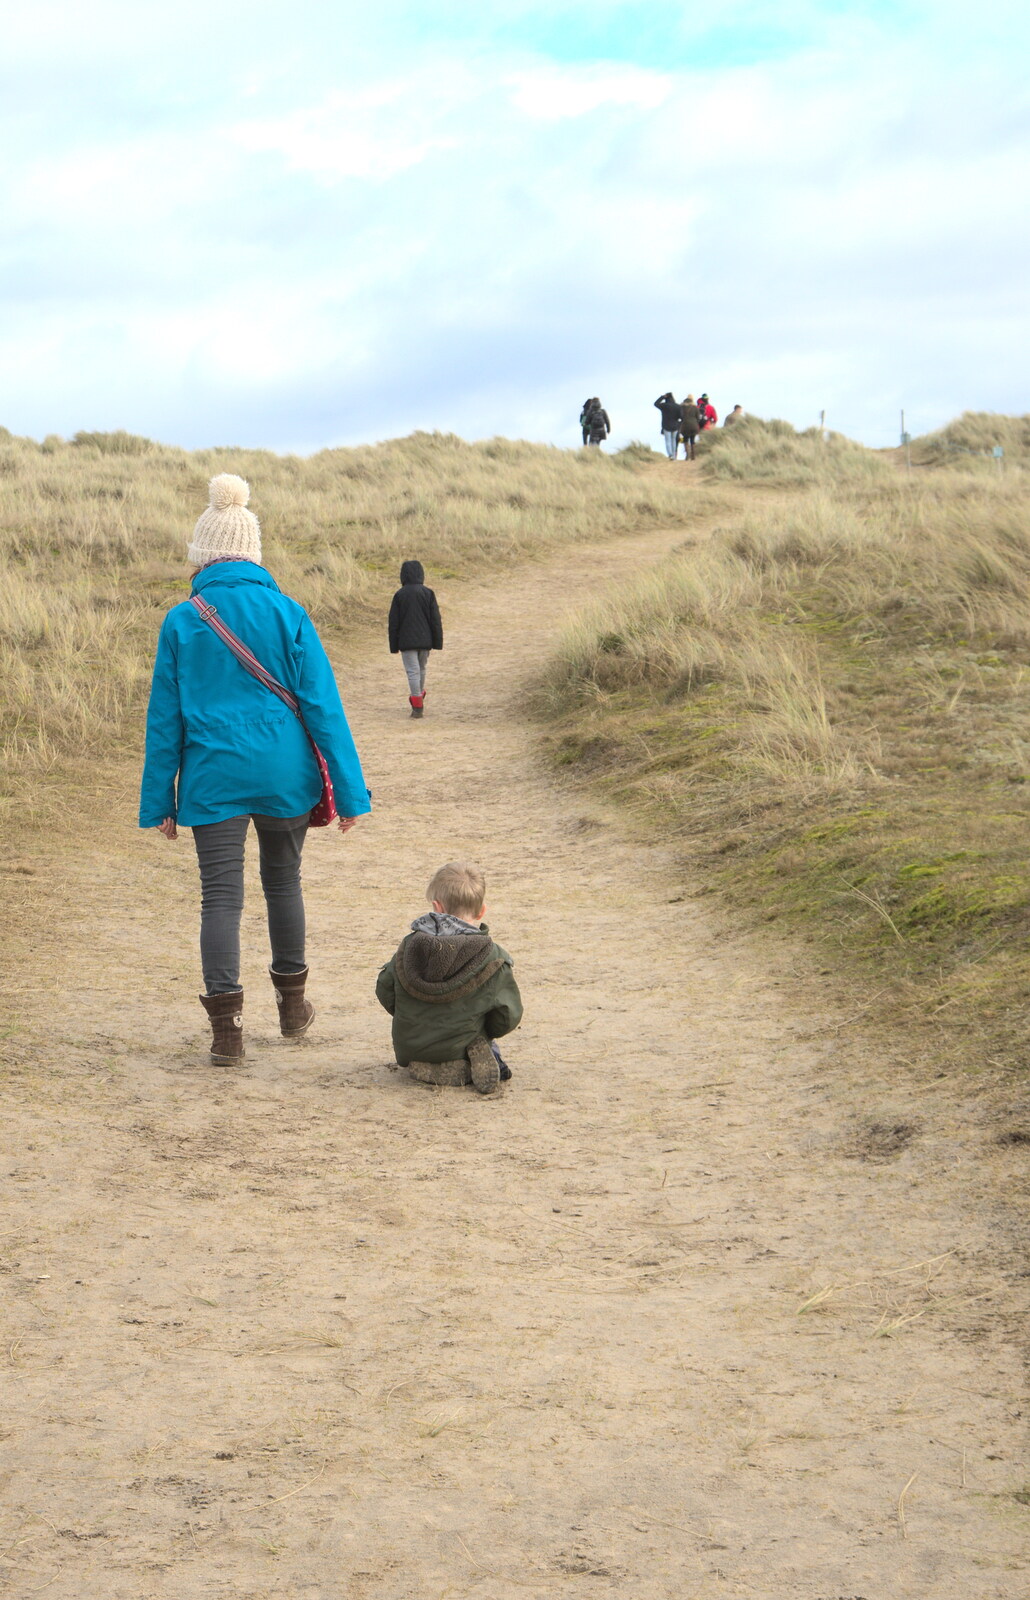 Heading up to the beach from The Seals of Horsey Gap, Norfolk - 21st February 2016